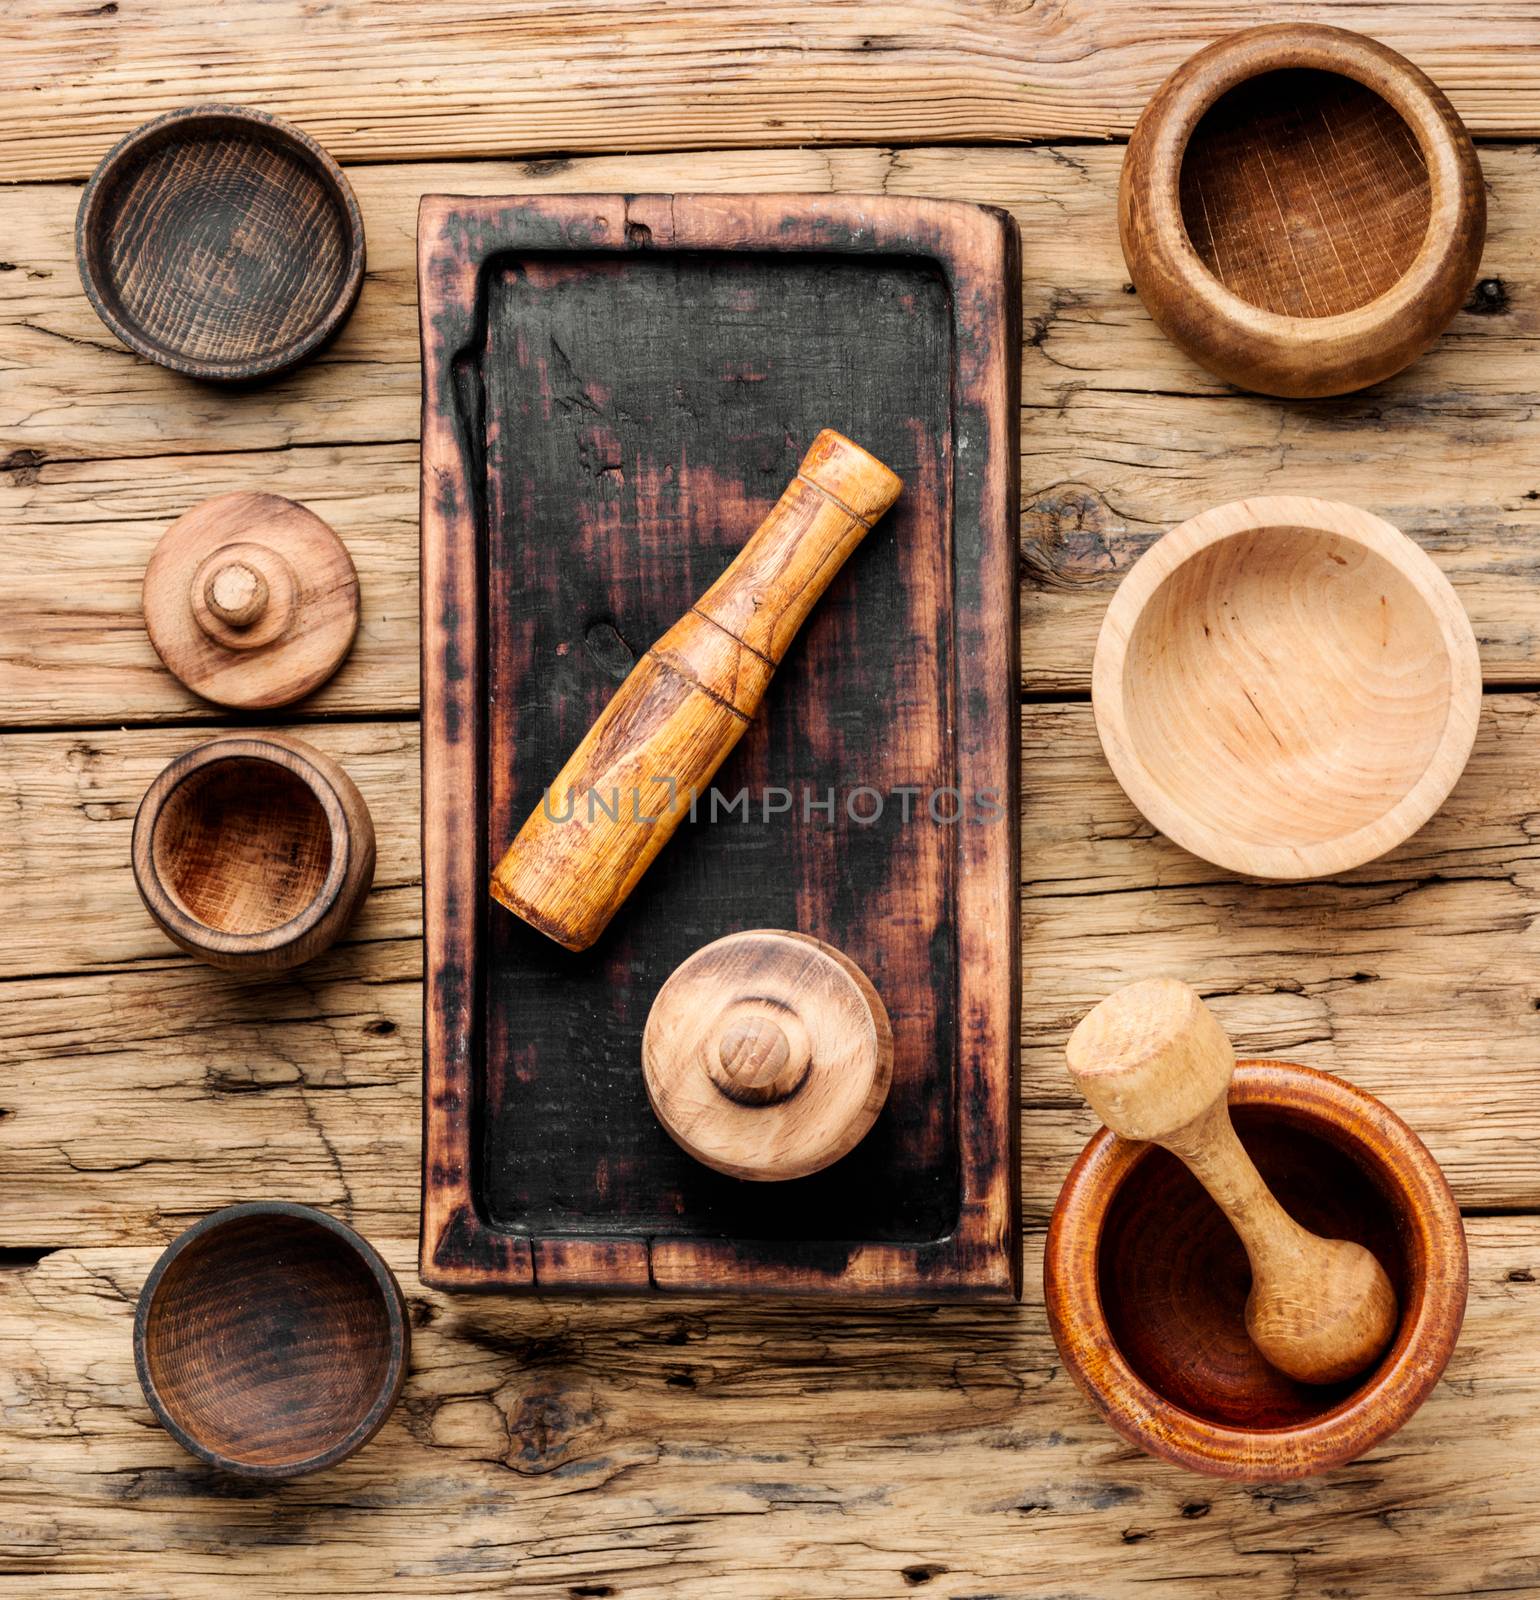 Empty wooden mortar and pestle on wooden old background.Cooking utensils